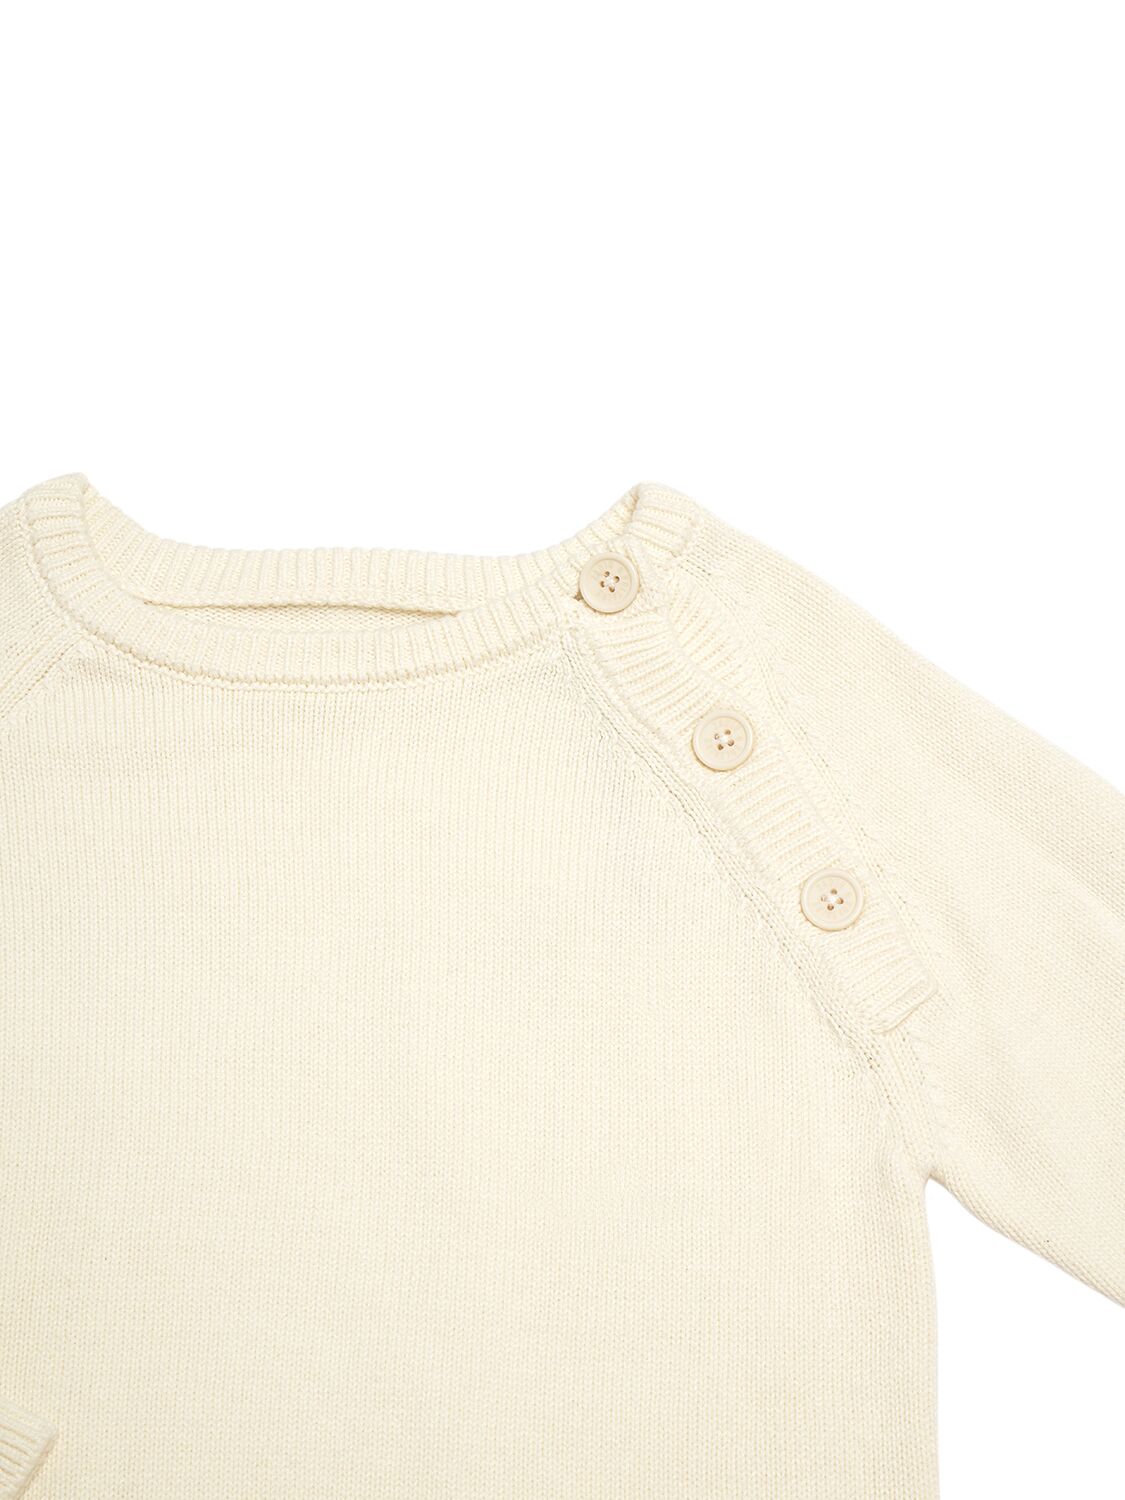 Shop Zadig & Voltaire Embellished Cotton Knit Sweater In Off-white